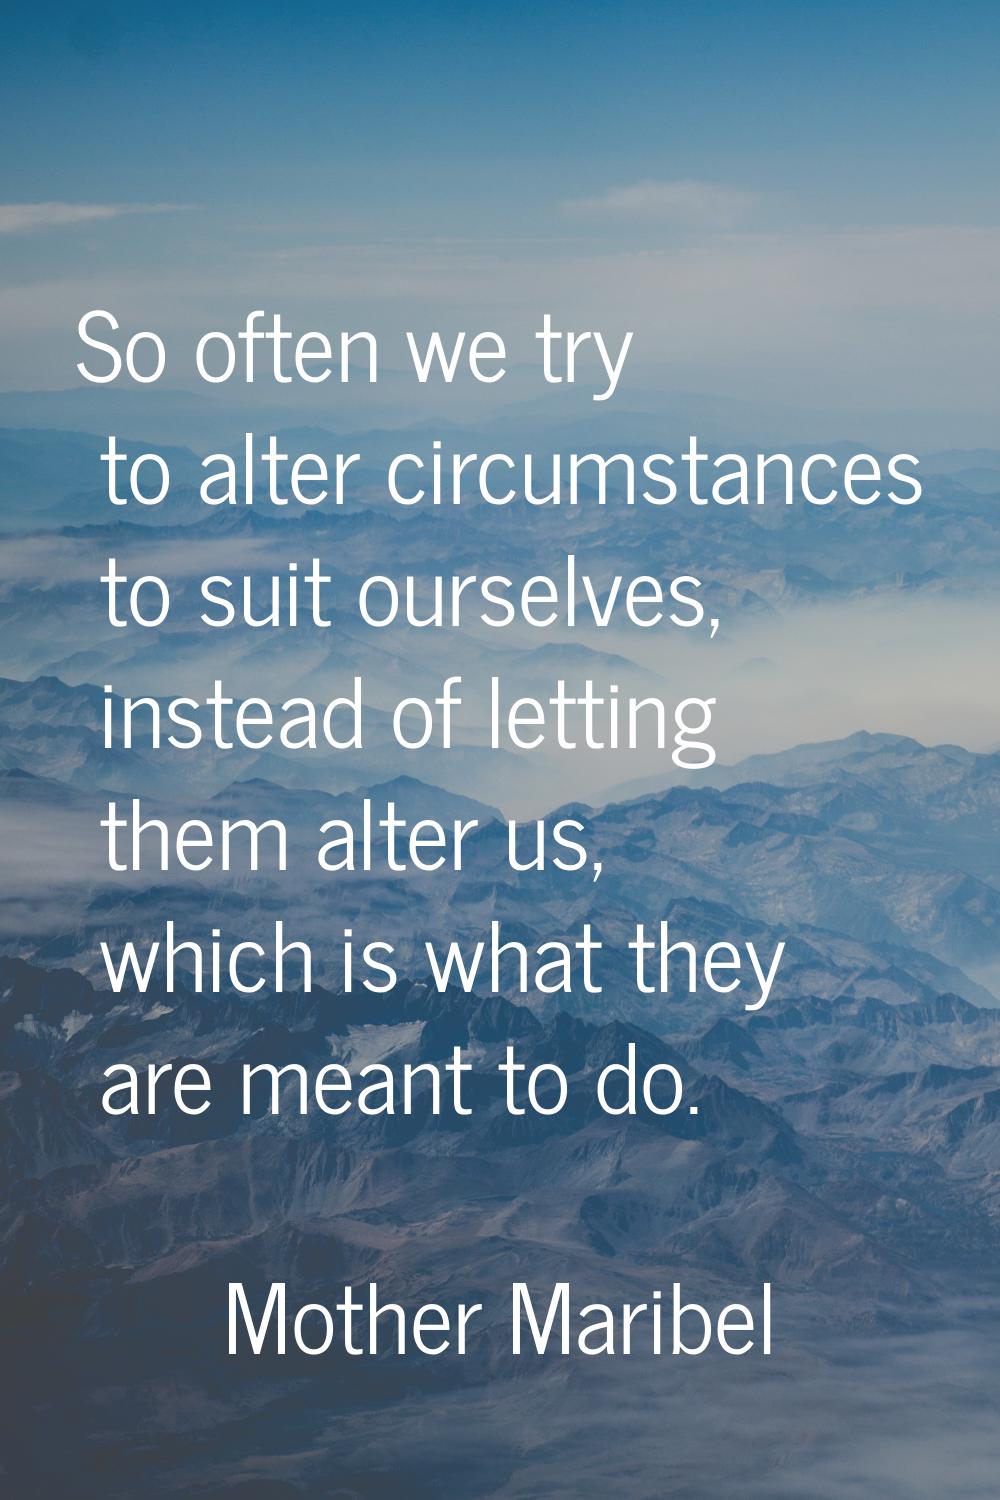 So often we try to alter circumstances to suit ourselves, instead of letting them alter us, which i